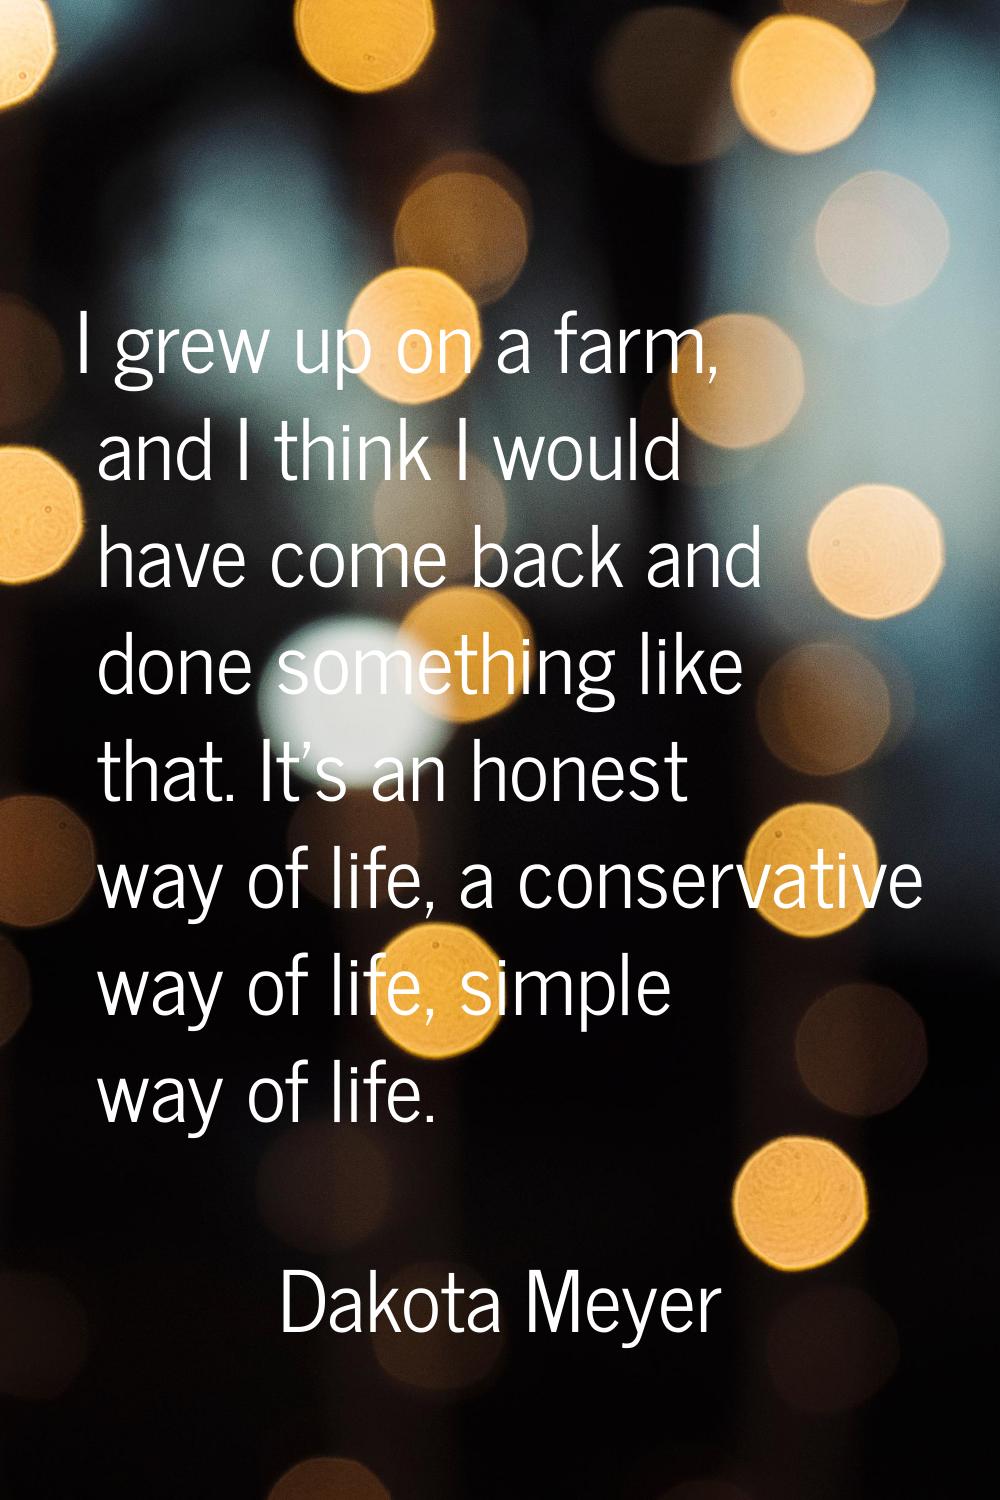 I grew up on a farm, and I think I would have come back and done something like that. It's an hones